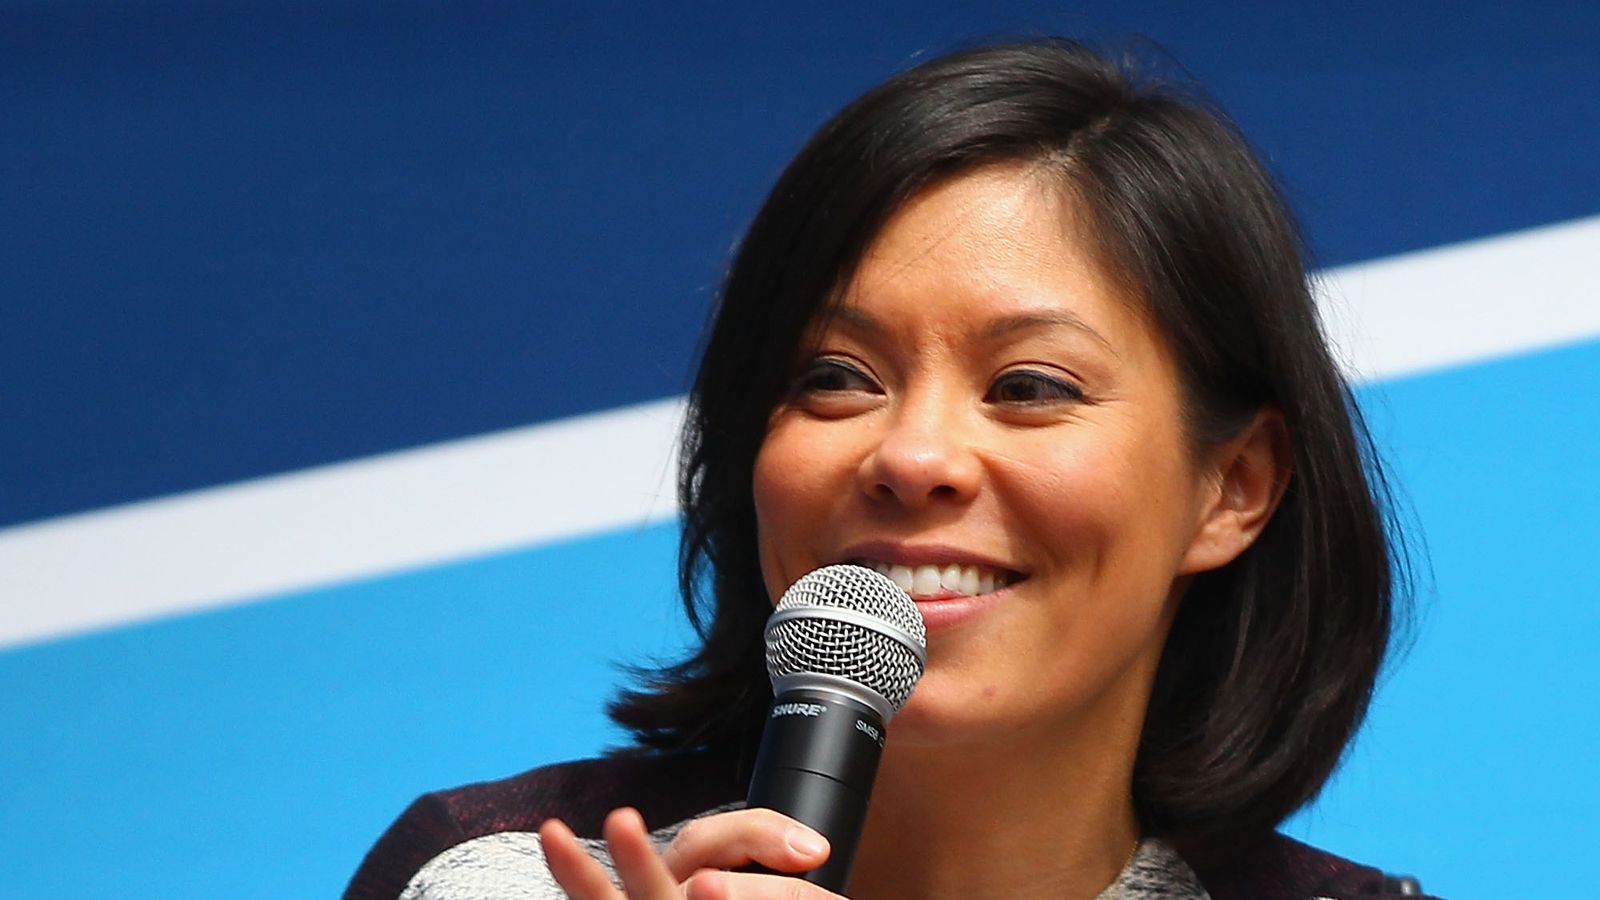 Rachel Maddow replacement Alex Wagner named as new host